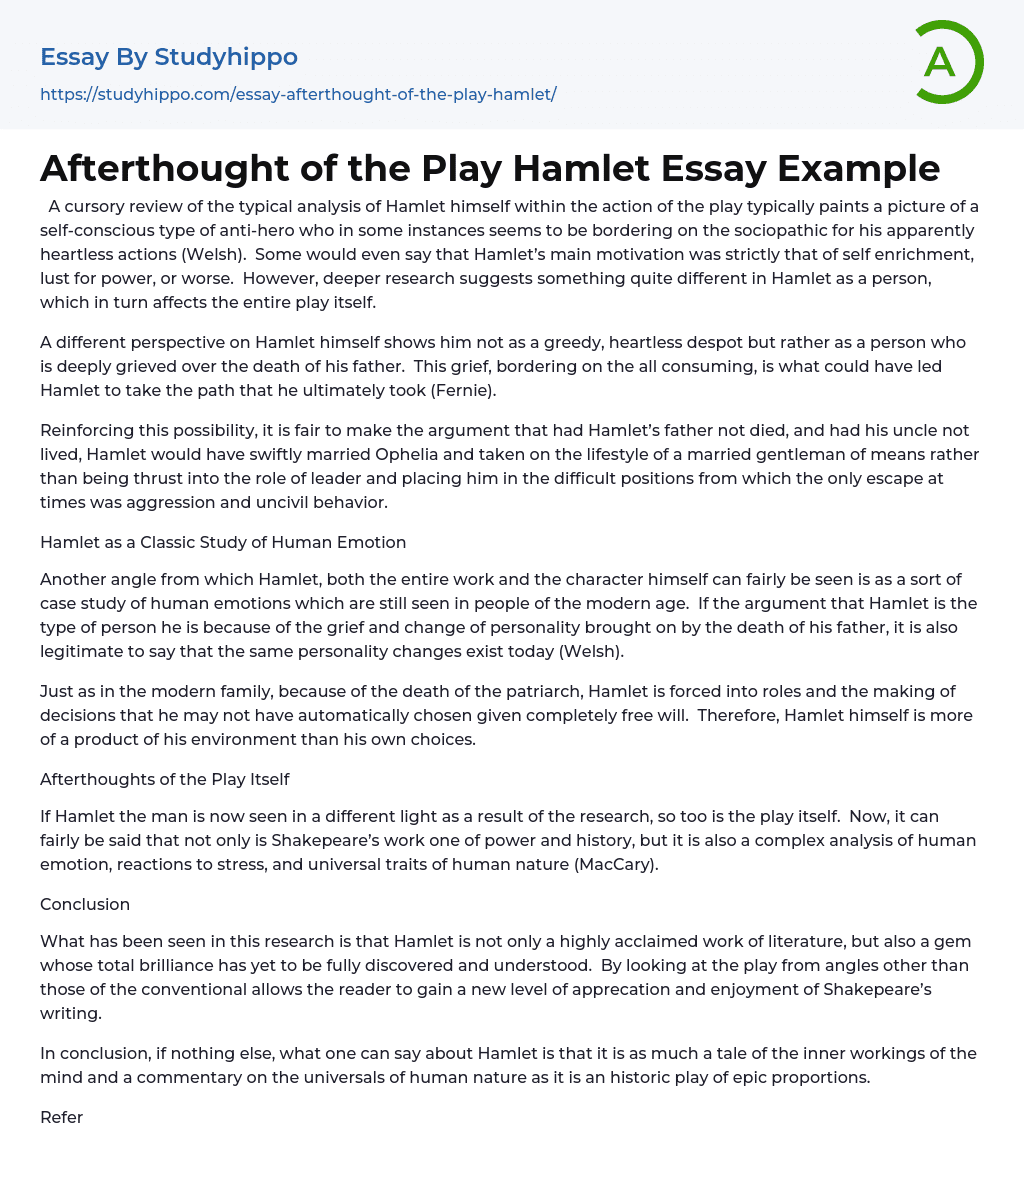 Afterthought of the Play Hamlet Essay Example